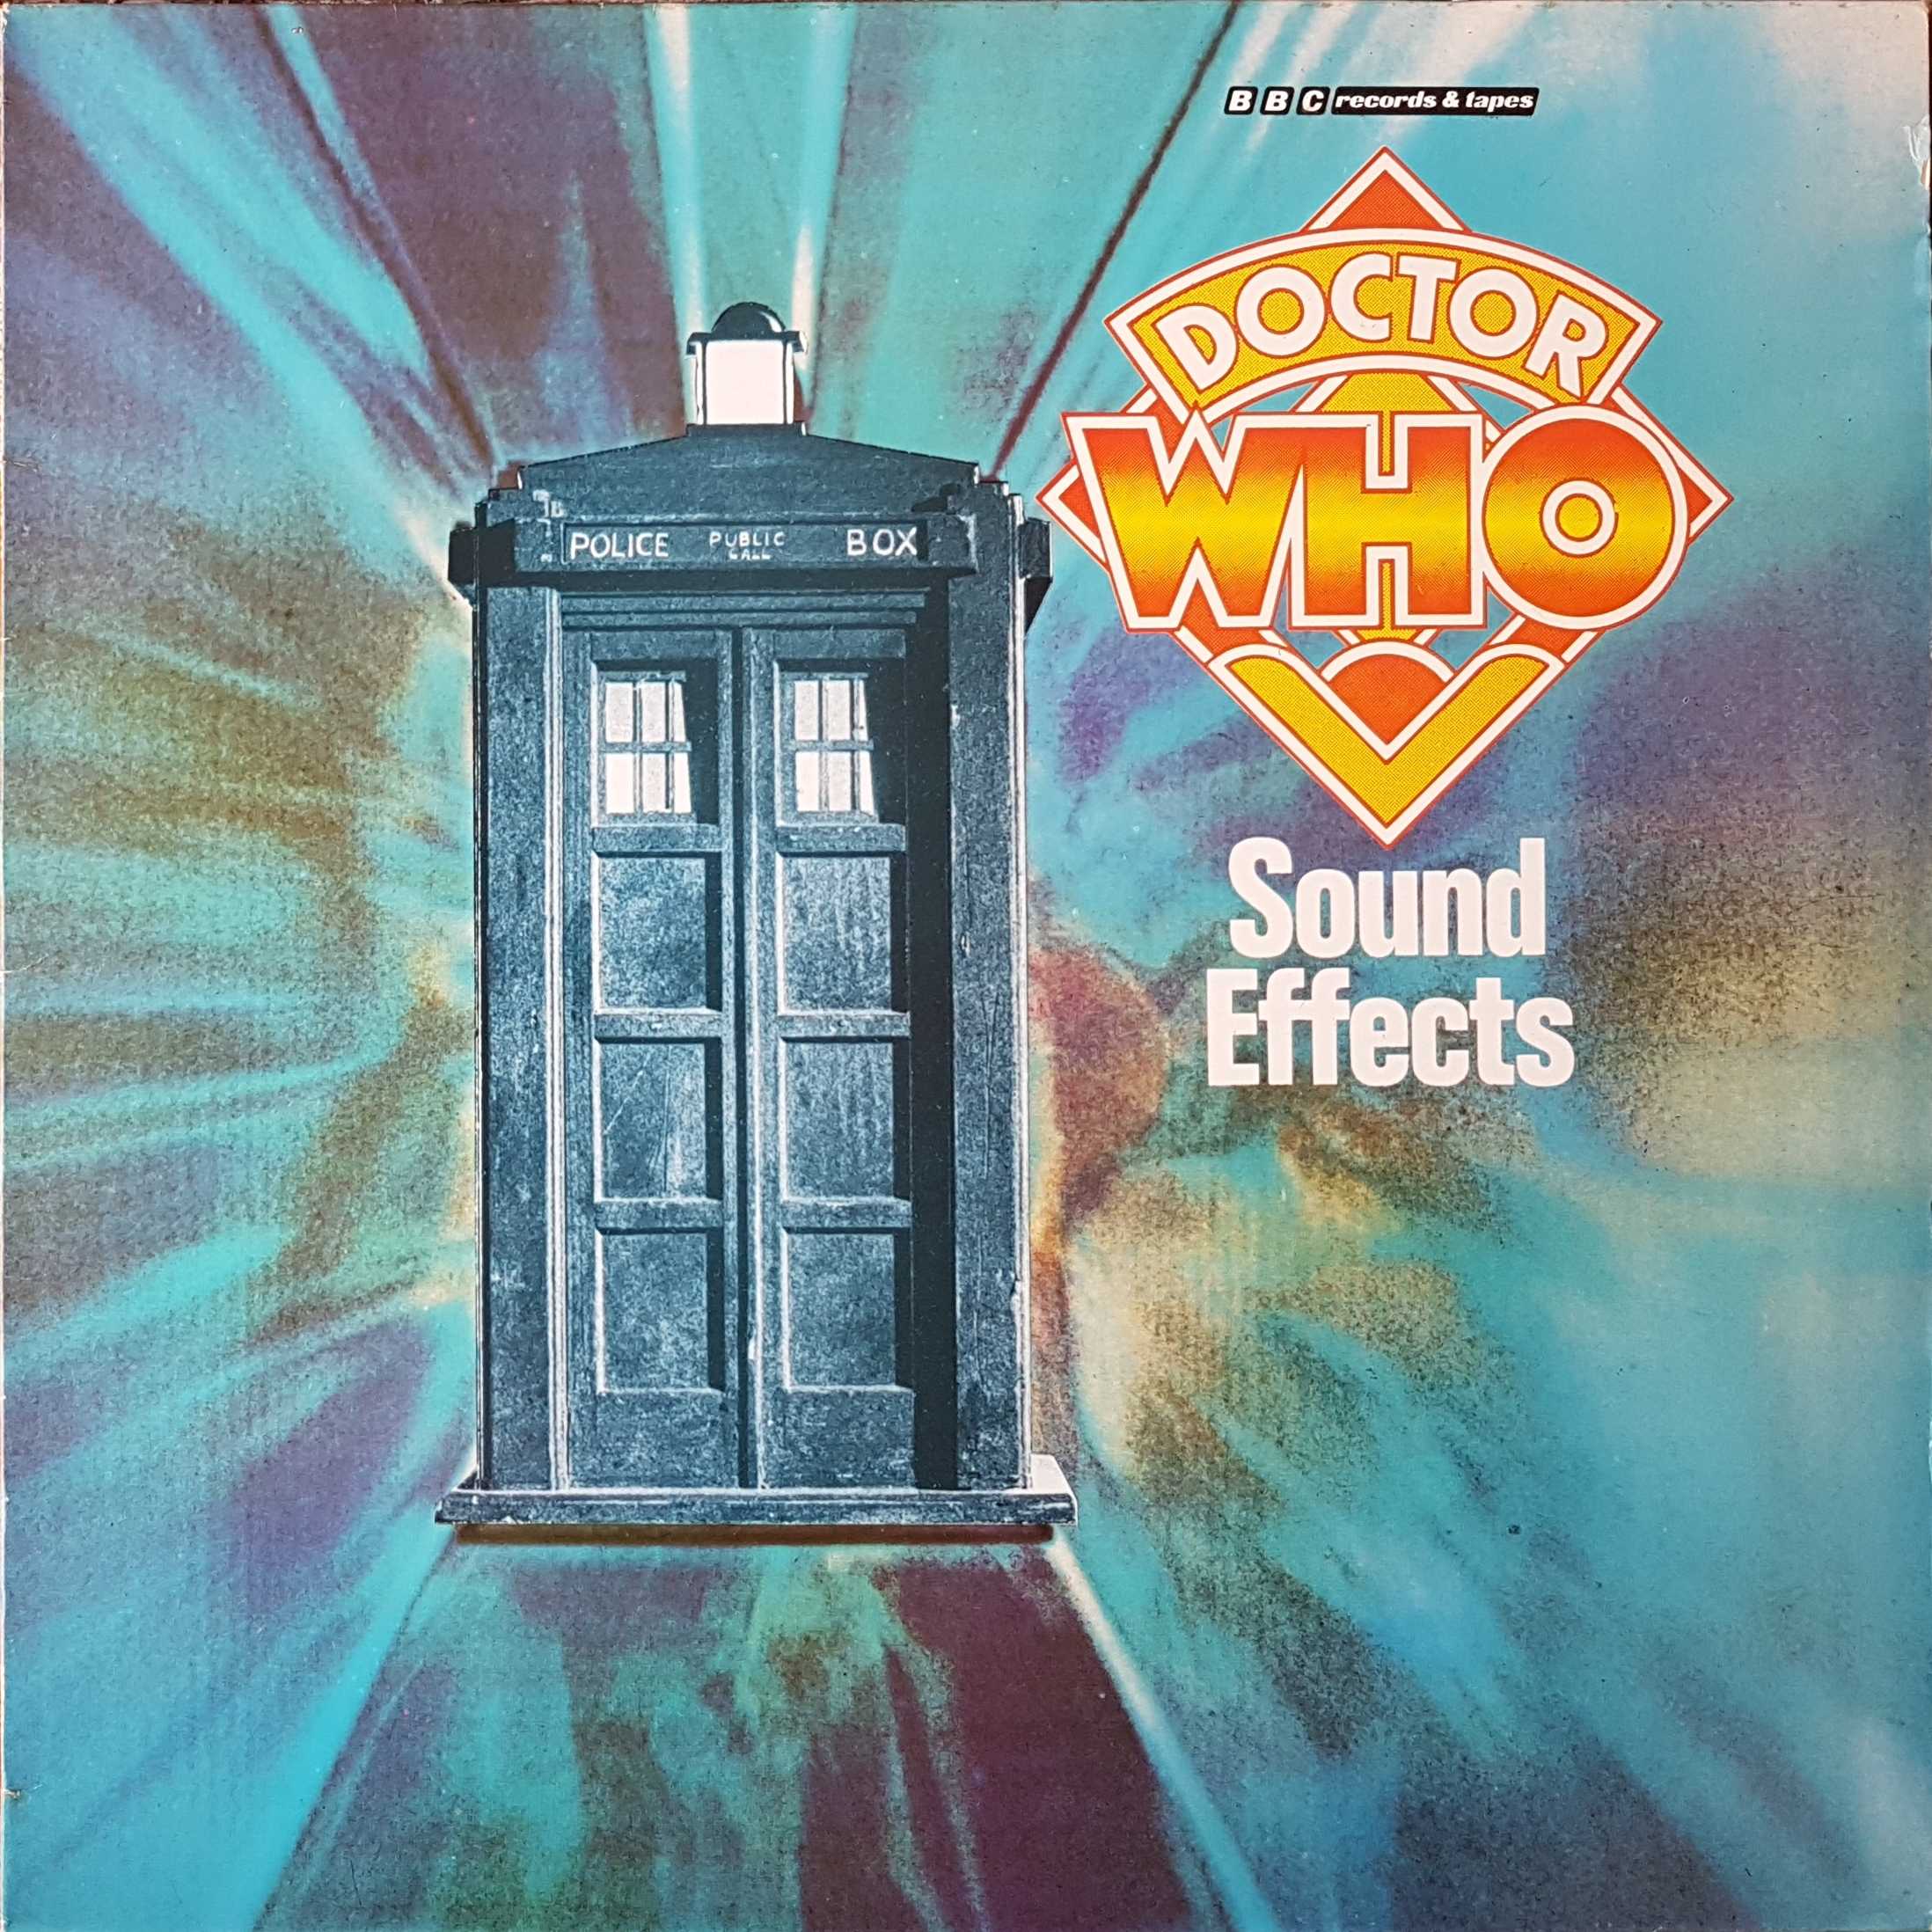 Picture of REC 316 Doctor Who sound effects (Sound effects no. 19) by artist BBC radiophonic workshop from the BBC albums - Records and Tapes library